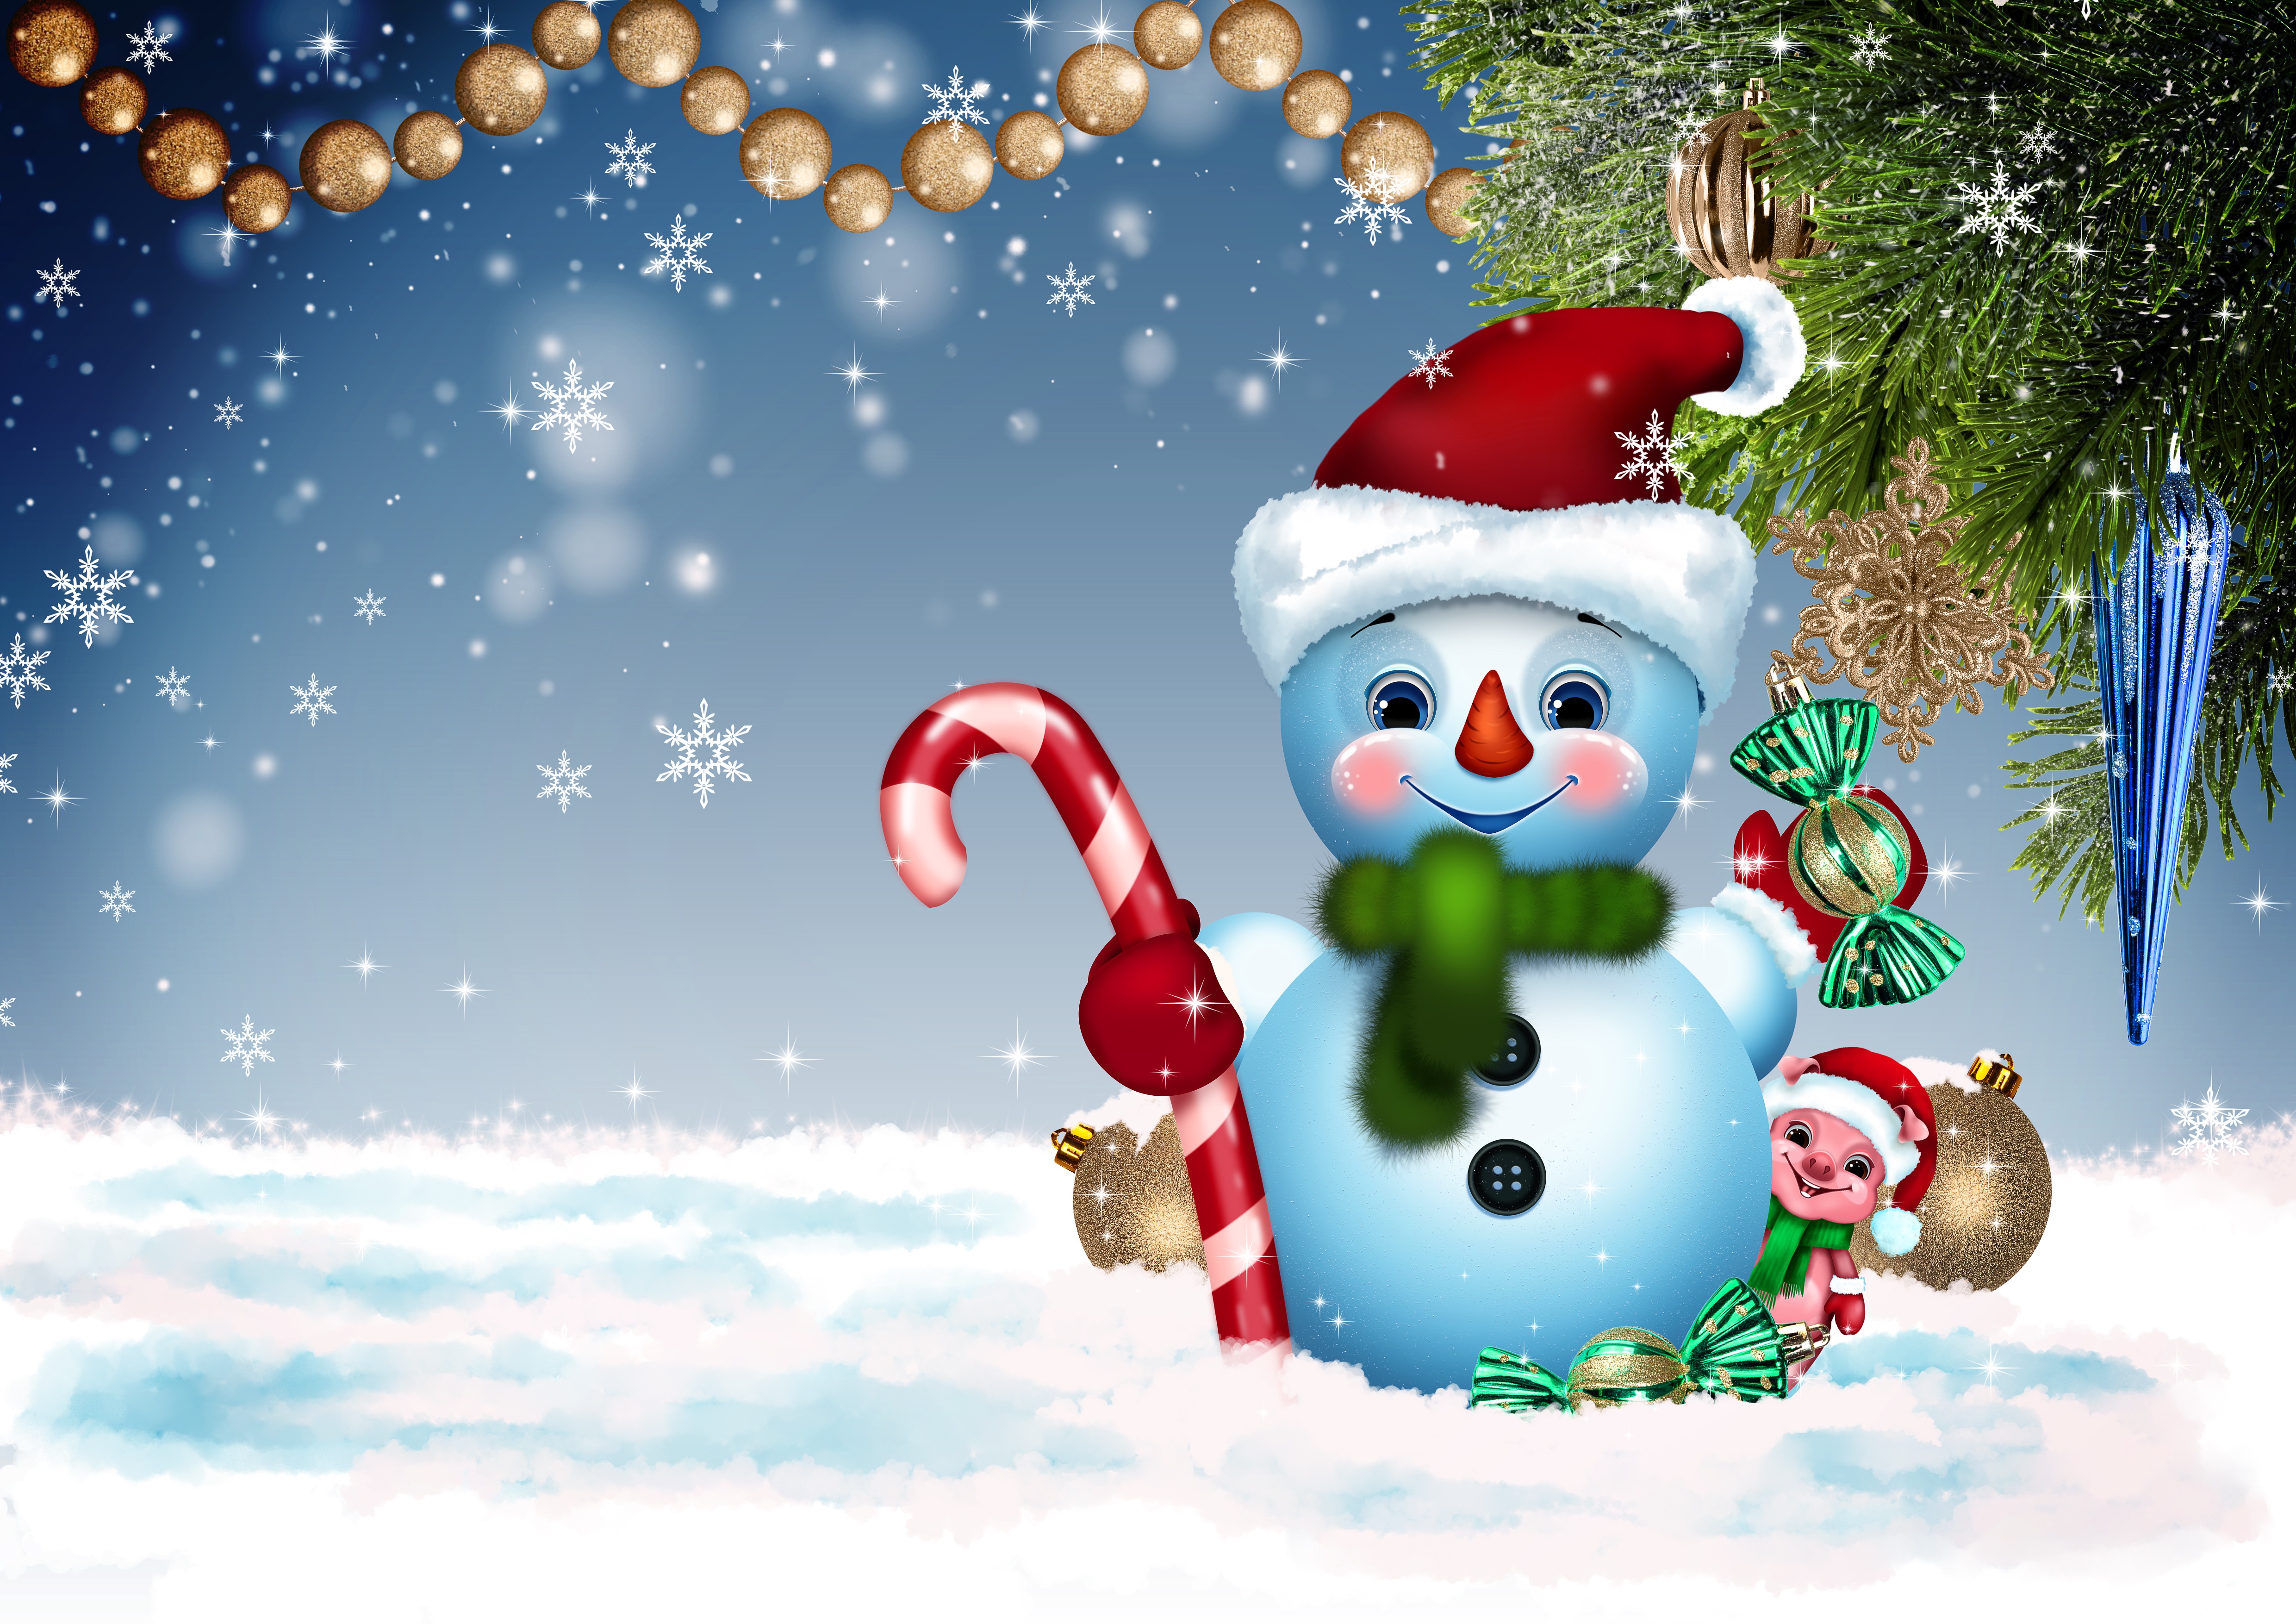 Wallpapers the snowman and the pig the pig is the symbol of the year Christmas on the desktop